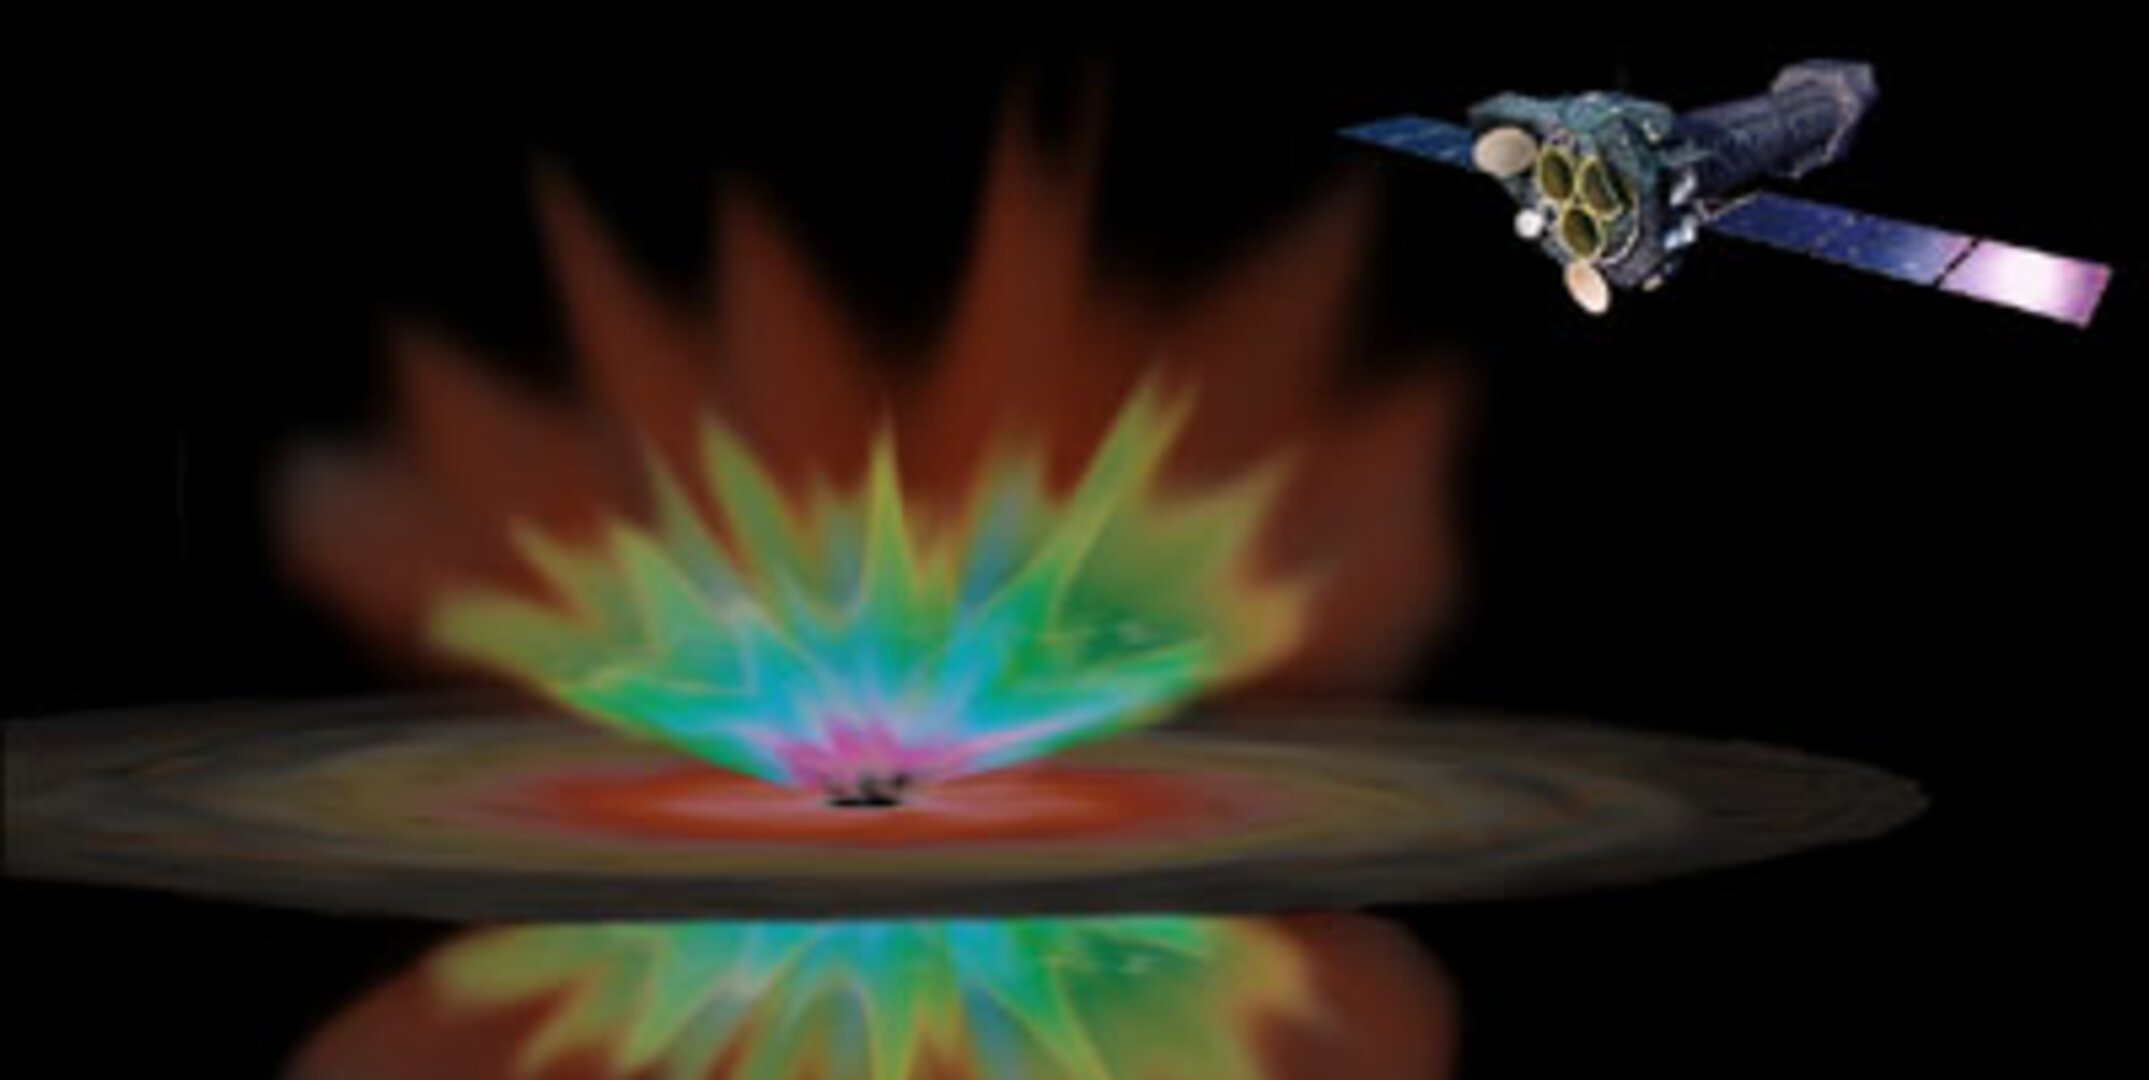 Artist's impression of the new 'unified model' for the different kinds of quasar activity